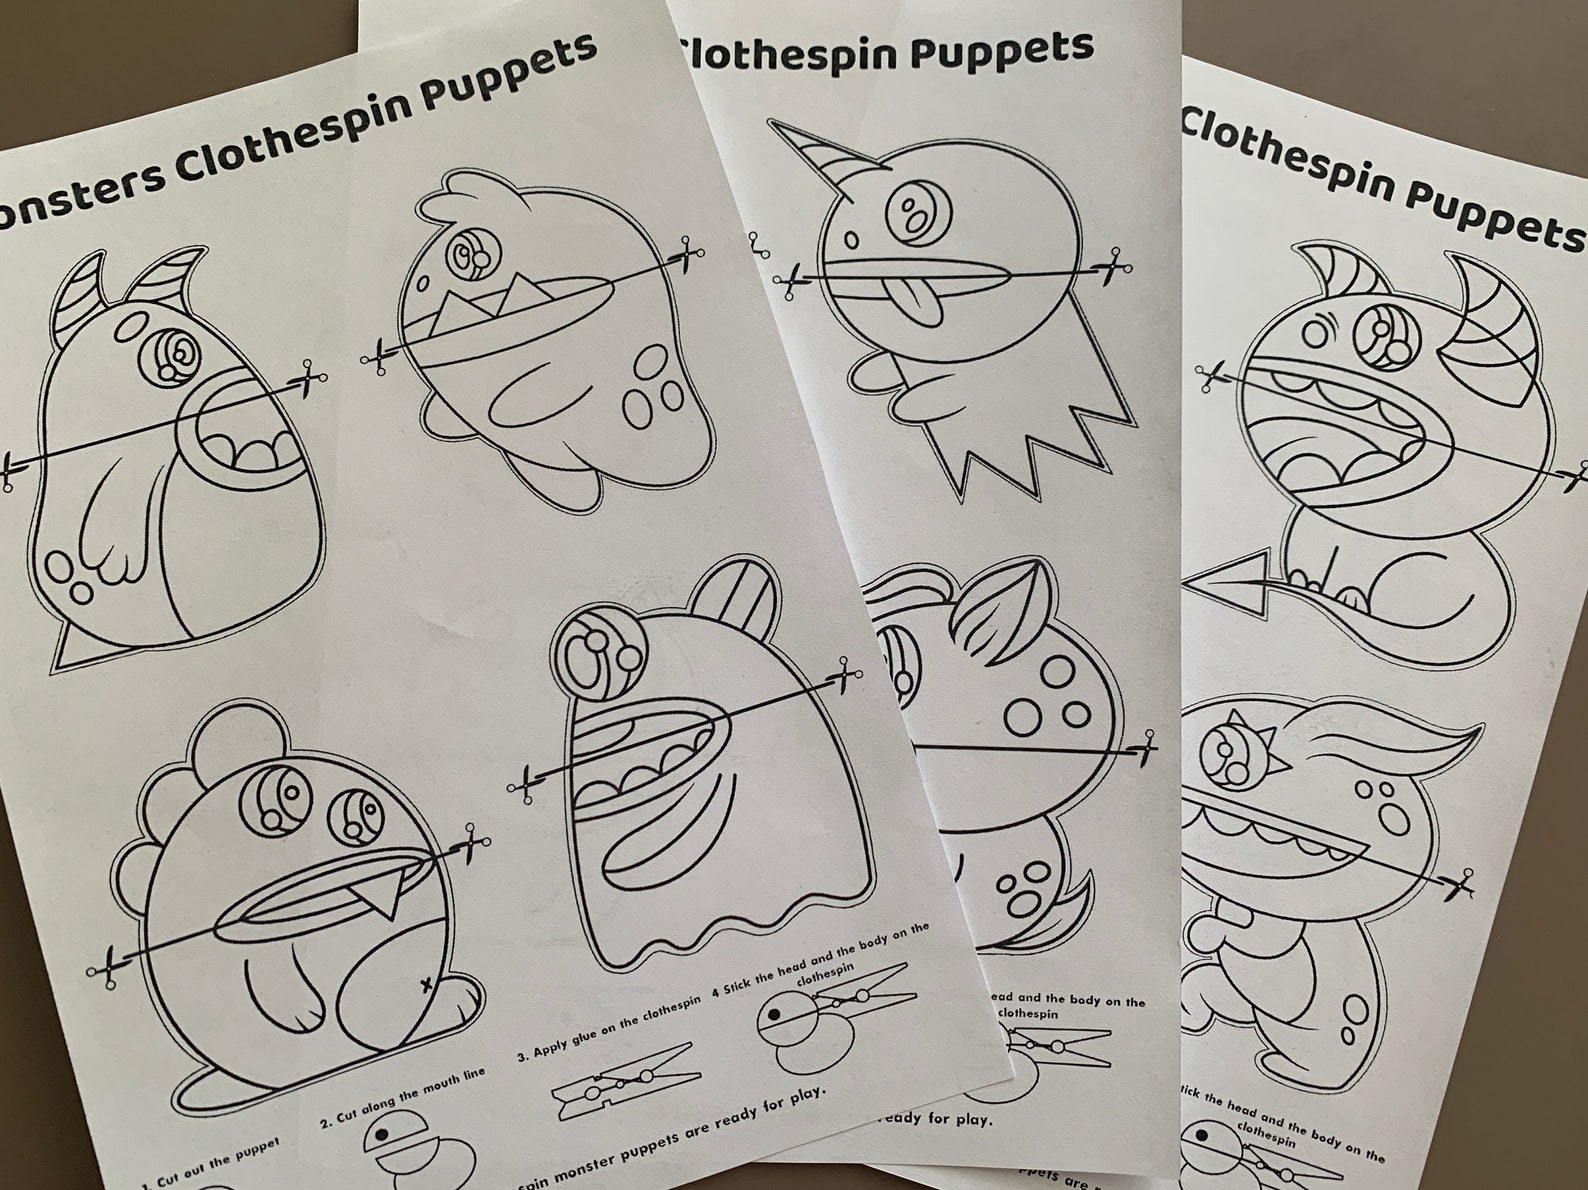 coloring-pages-pdf-pattern-monsters-clothespin-puppets-fine-etsy